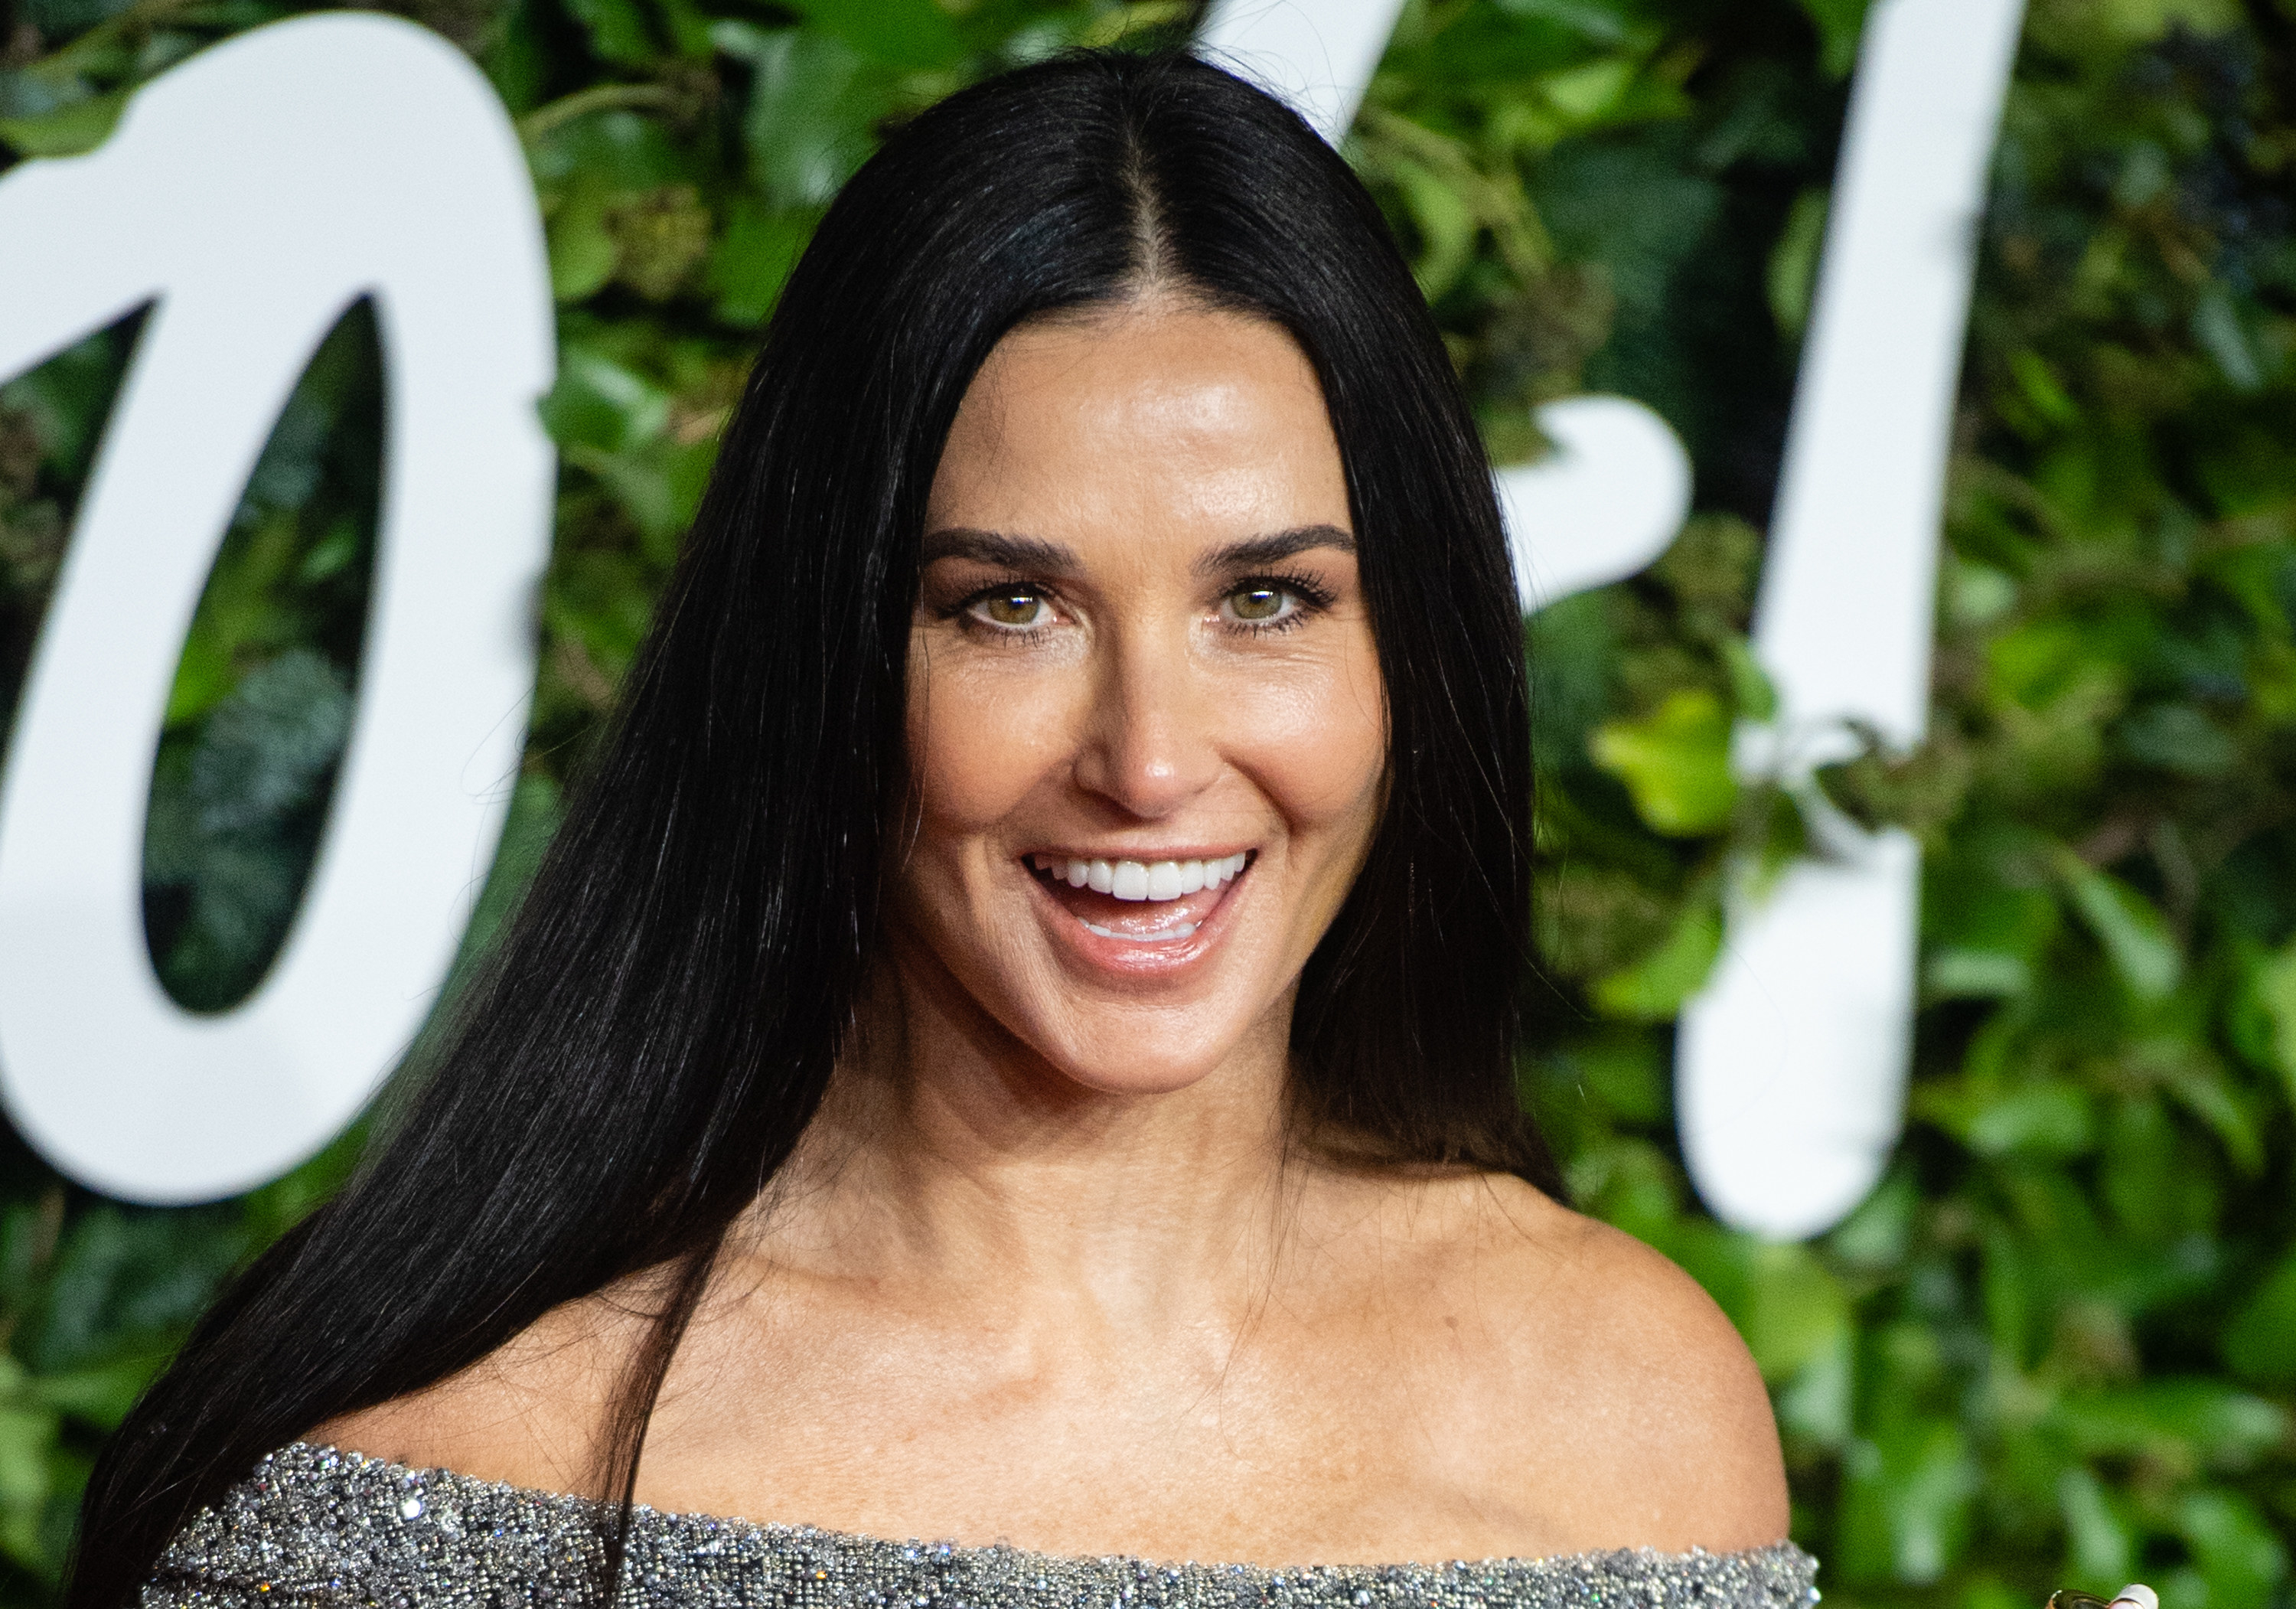 Demi Moore smiling for the camera at an event